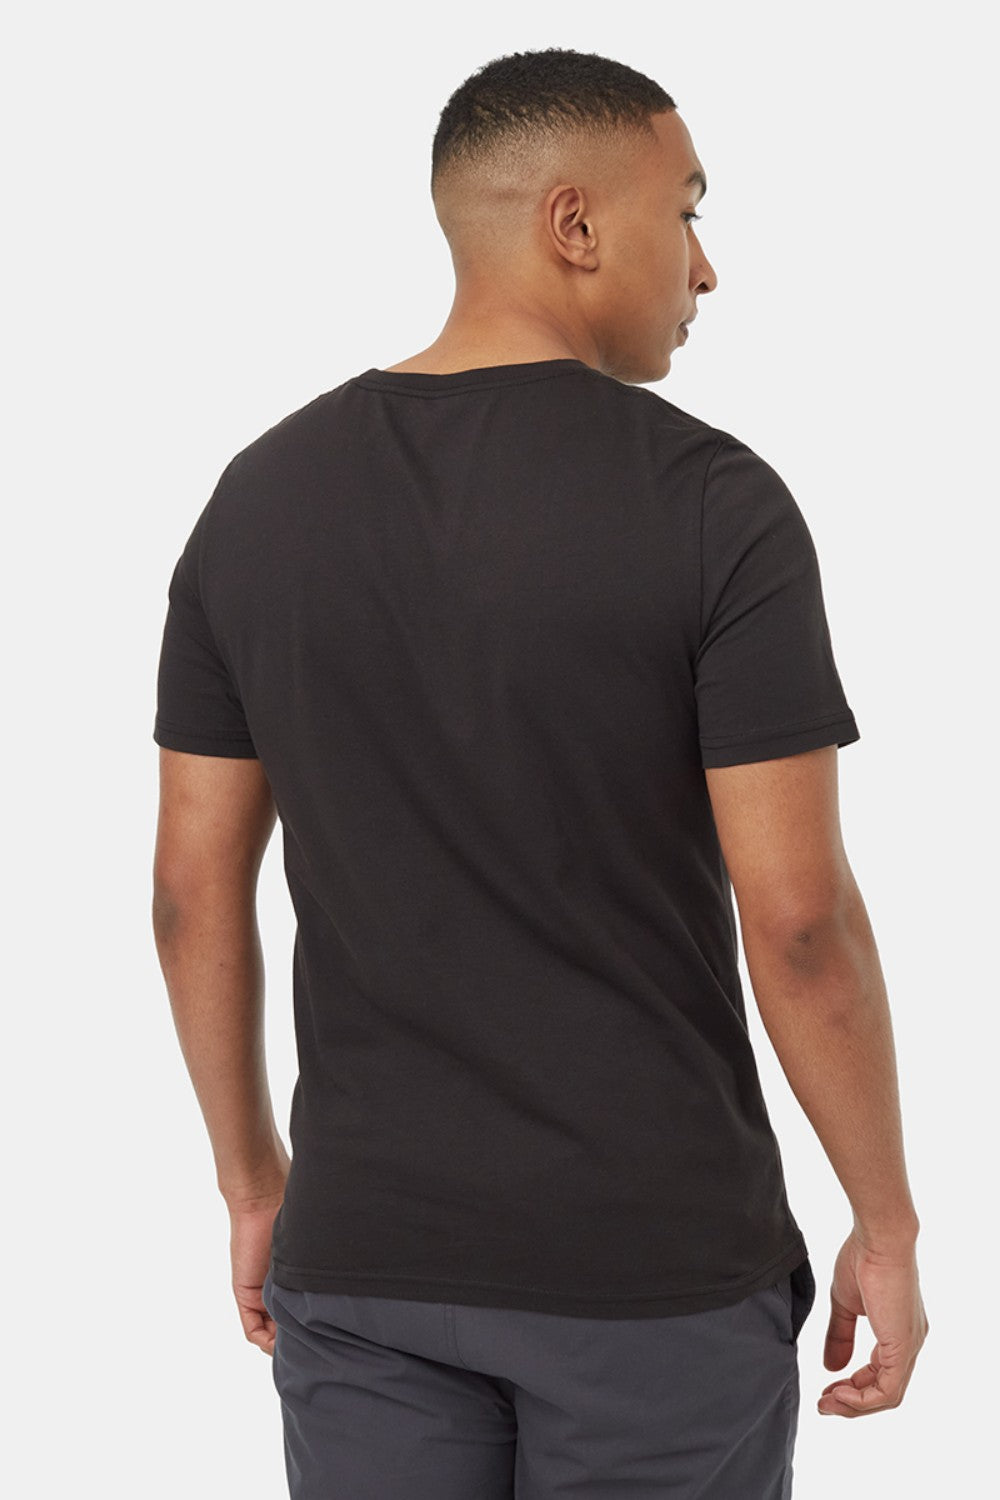 Super breathable lightweight organic cotton T-shirt that is C2C certified and comfortable for everyday wear.